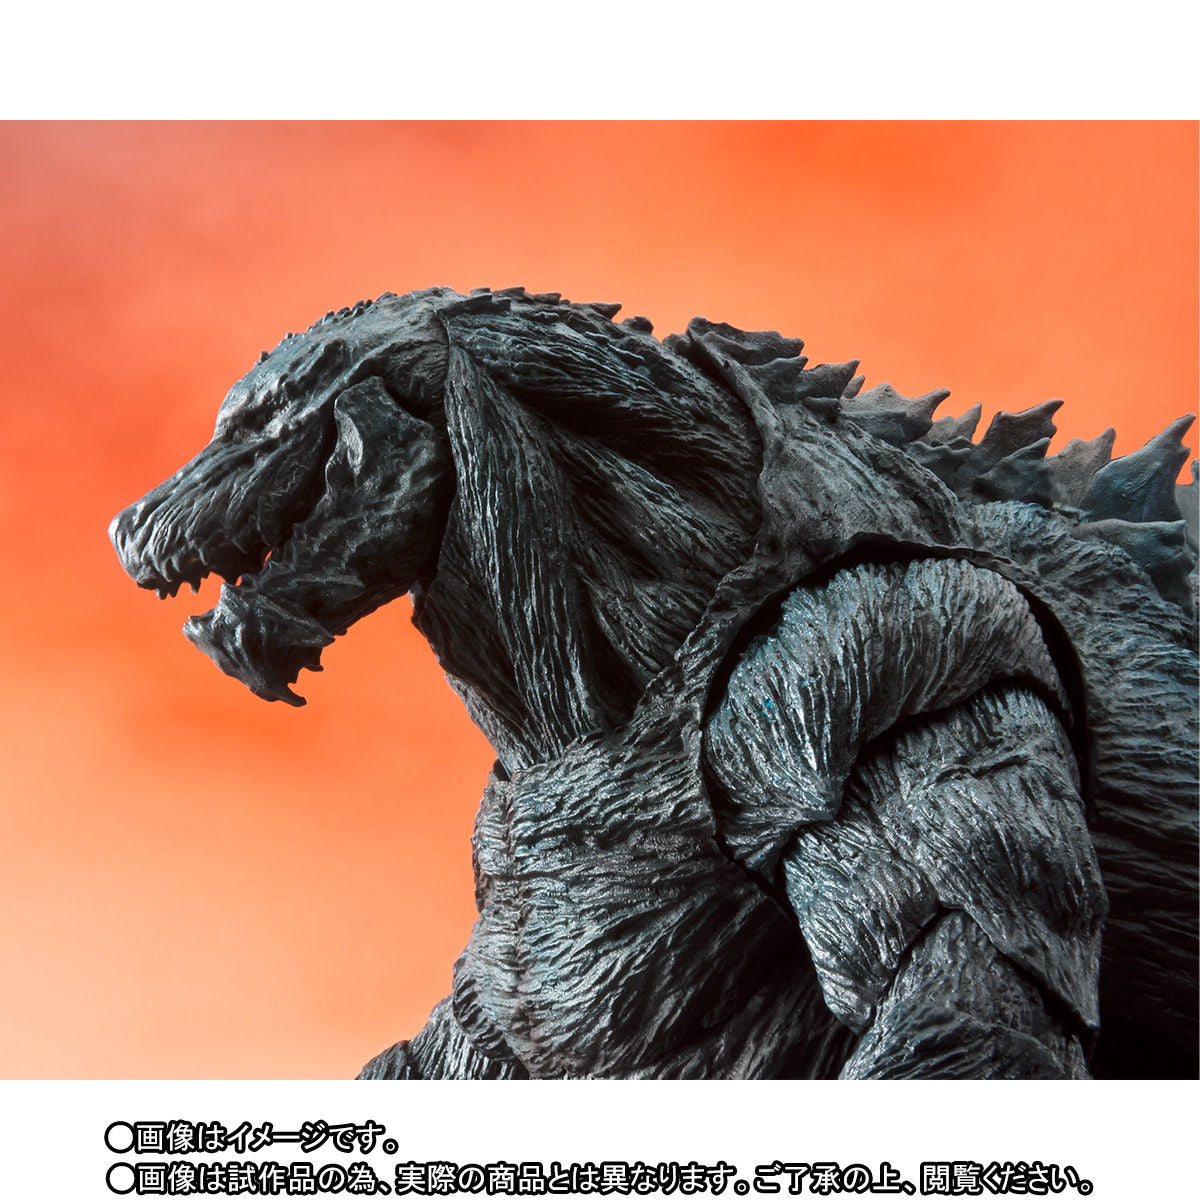 S.H.MonsterArts - Godzilla: Planet of the Monsters - Godzilla Earth (TamashiiWeb Exclusive) - Marvelous Toys